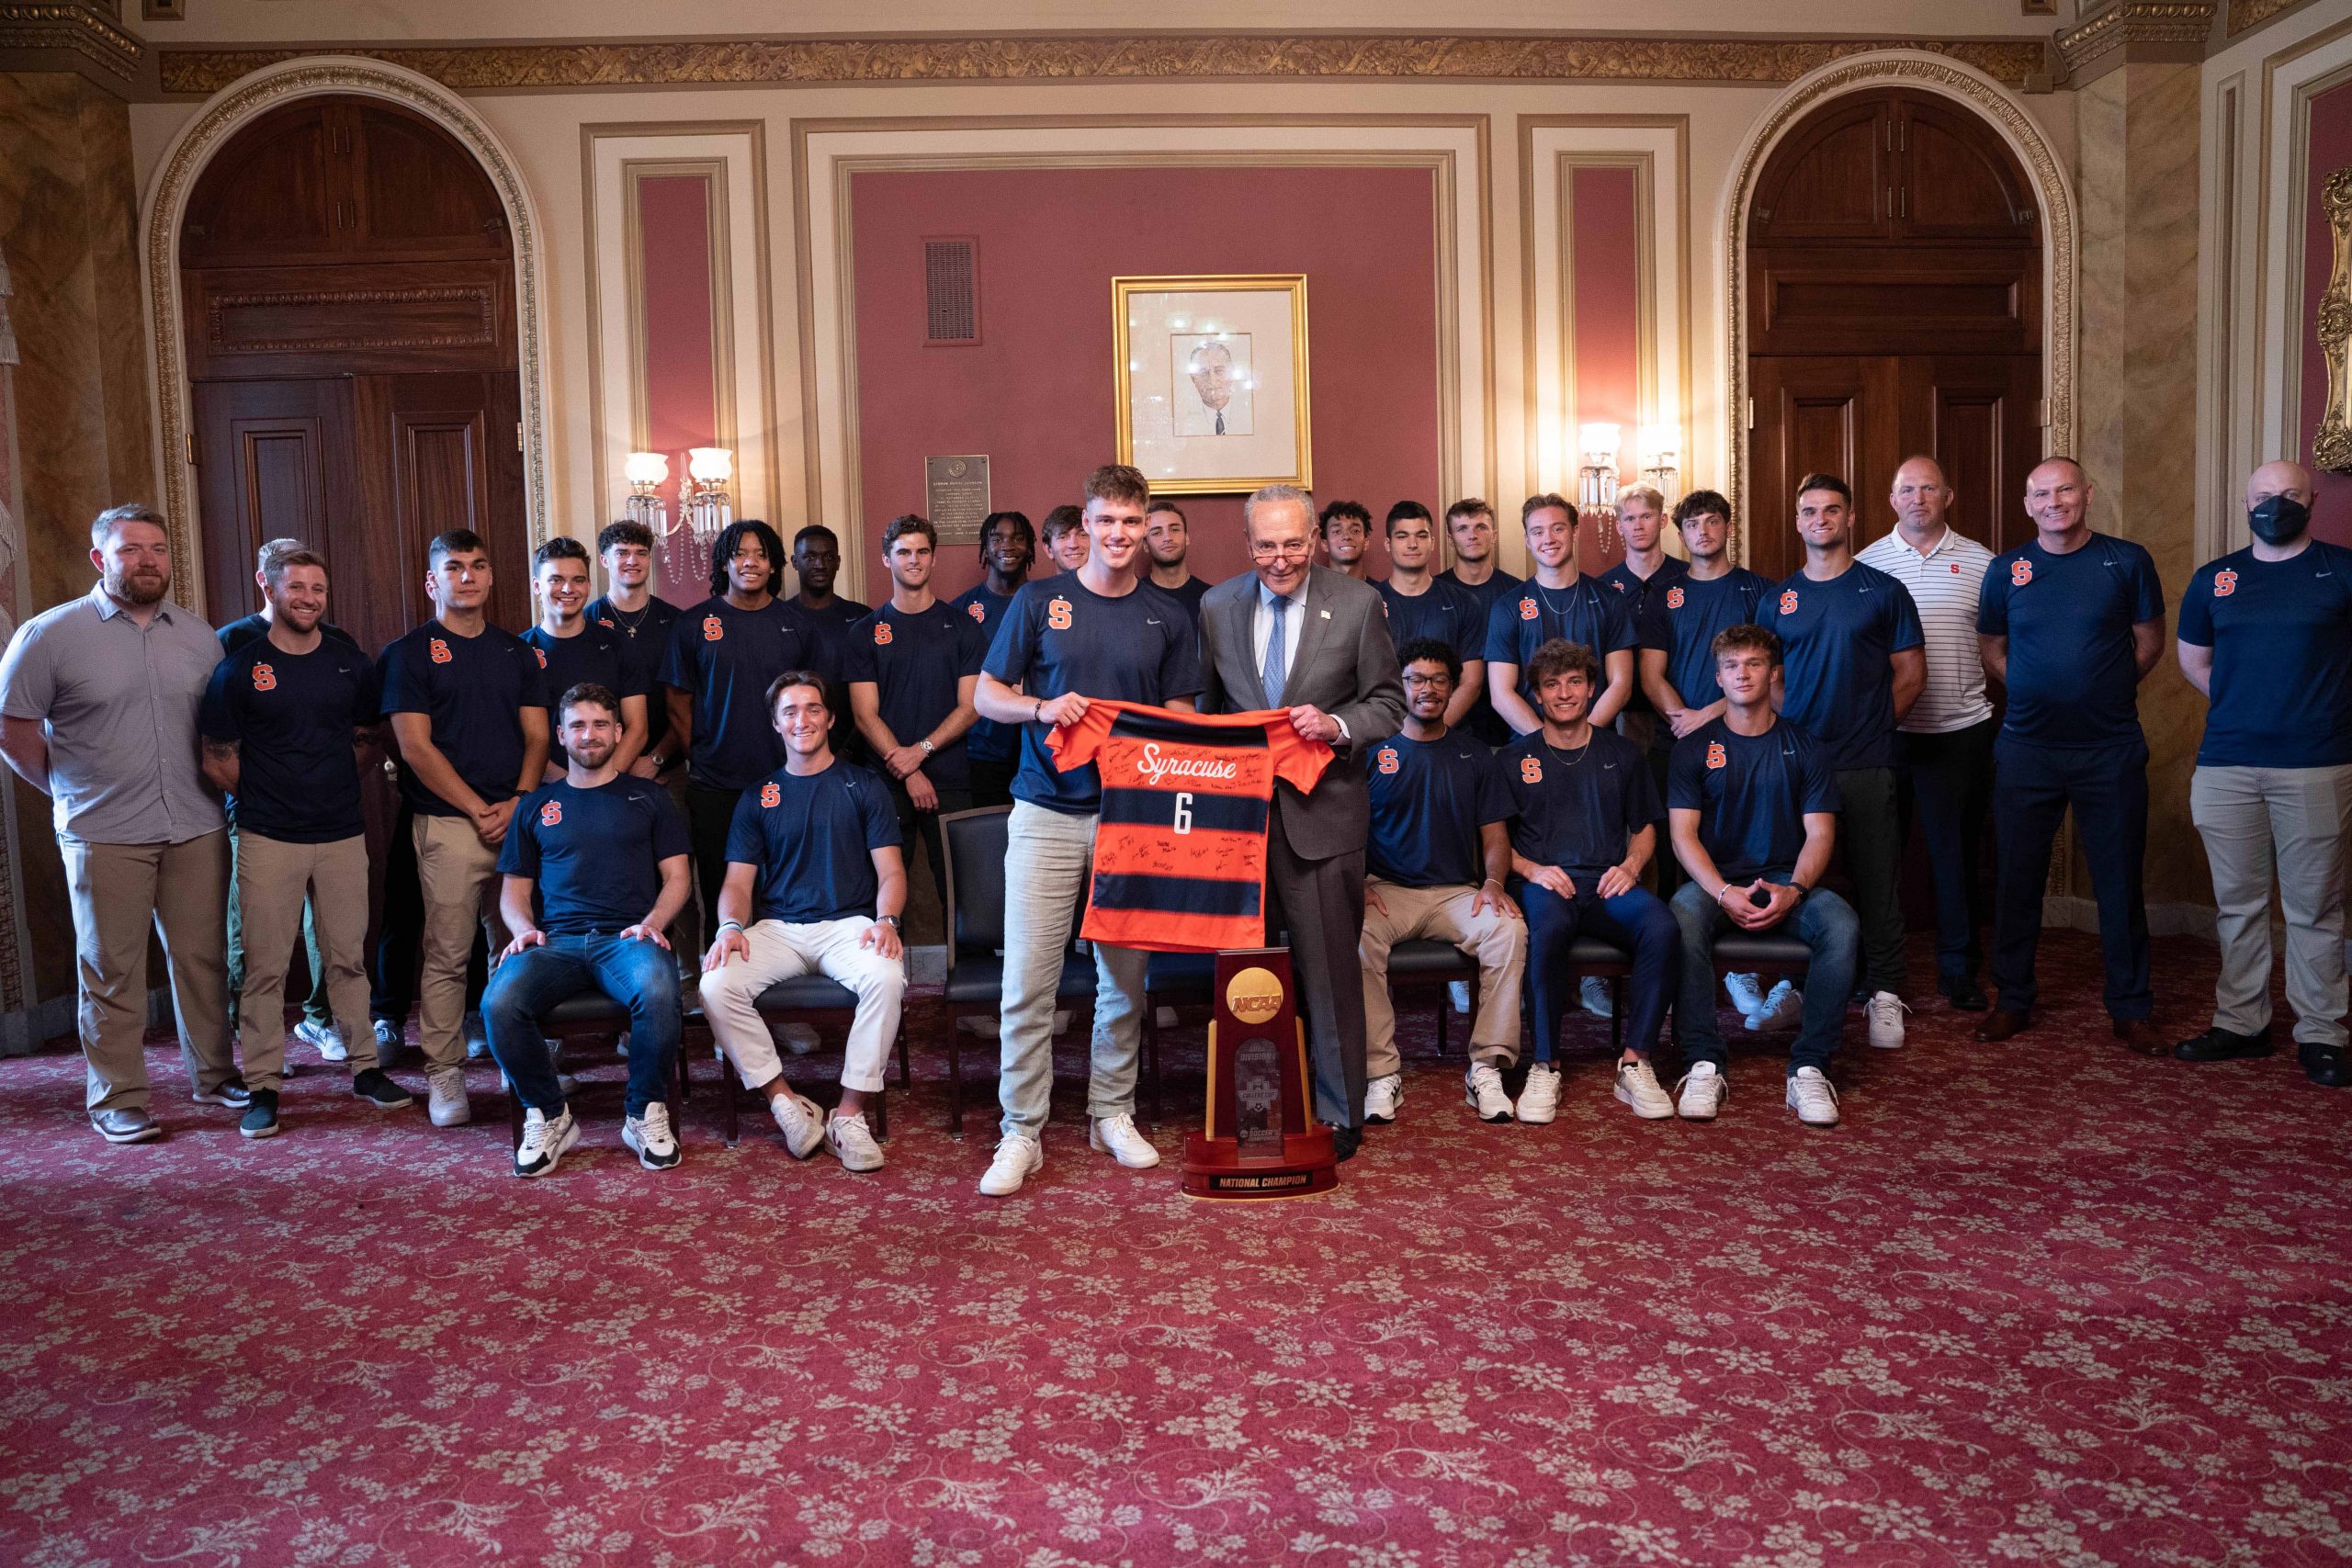 Men's soccer team posing with Charles Schumer at the Capitol. 